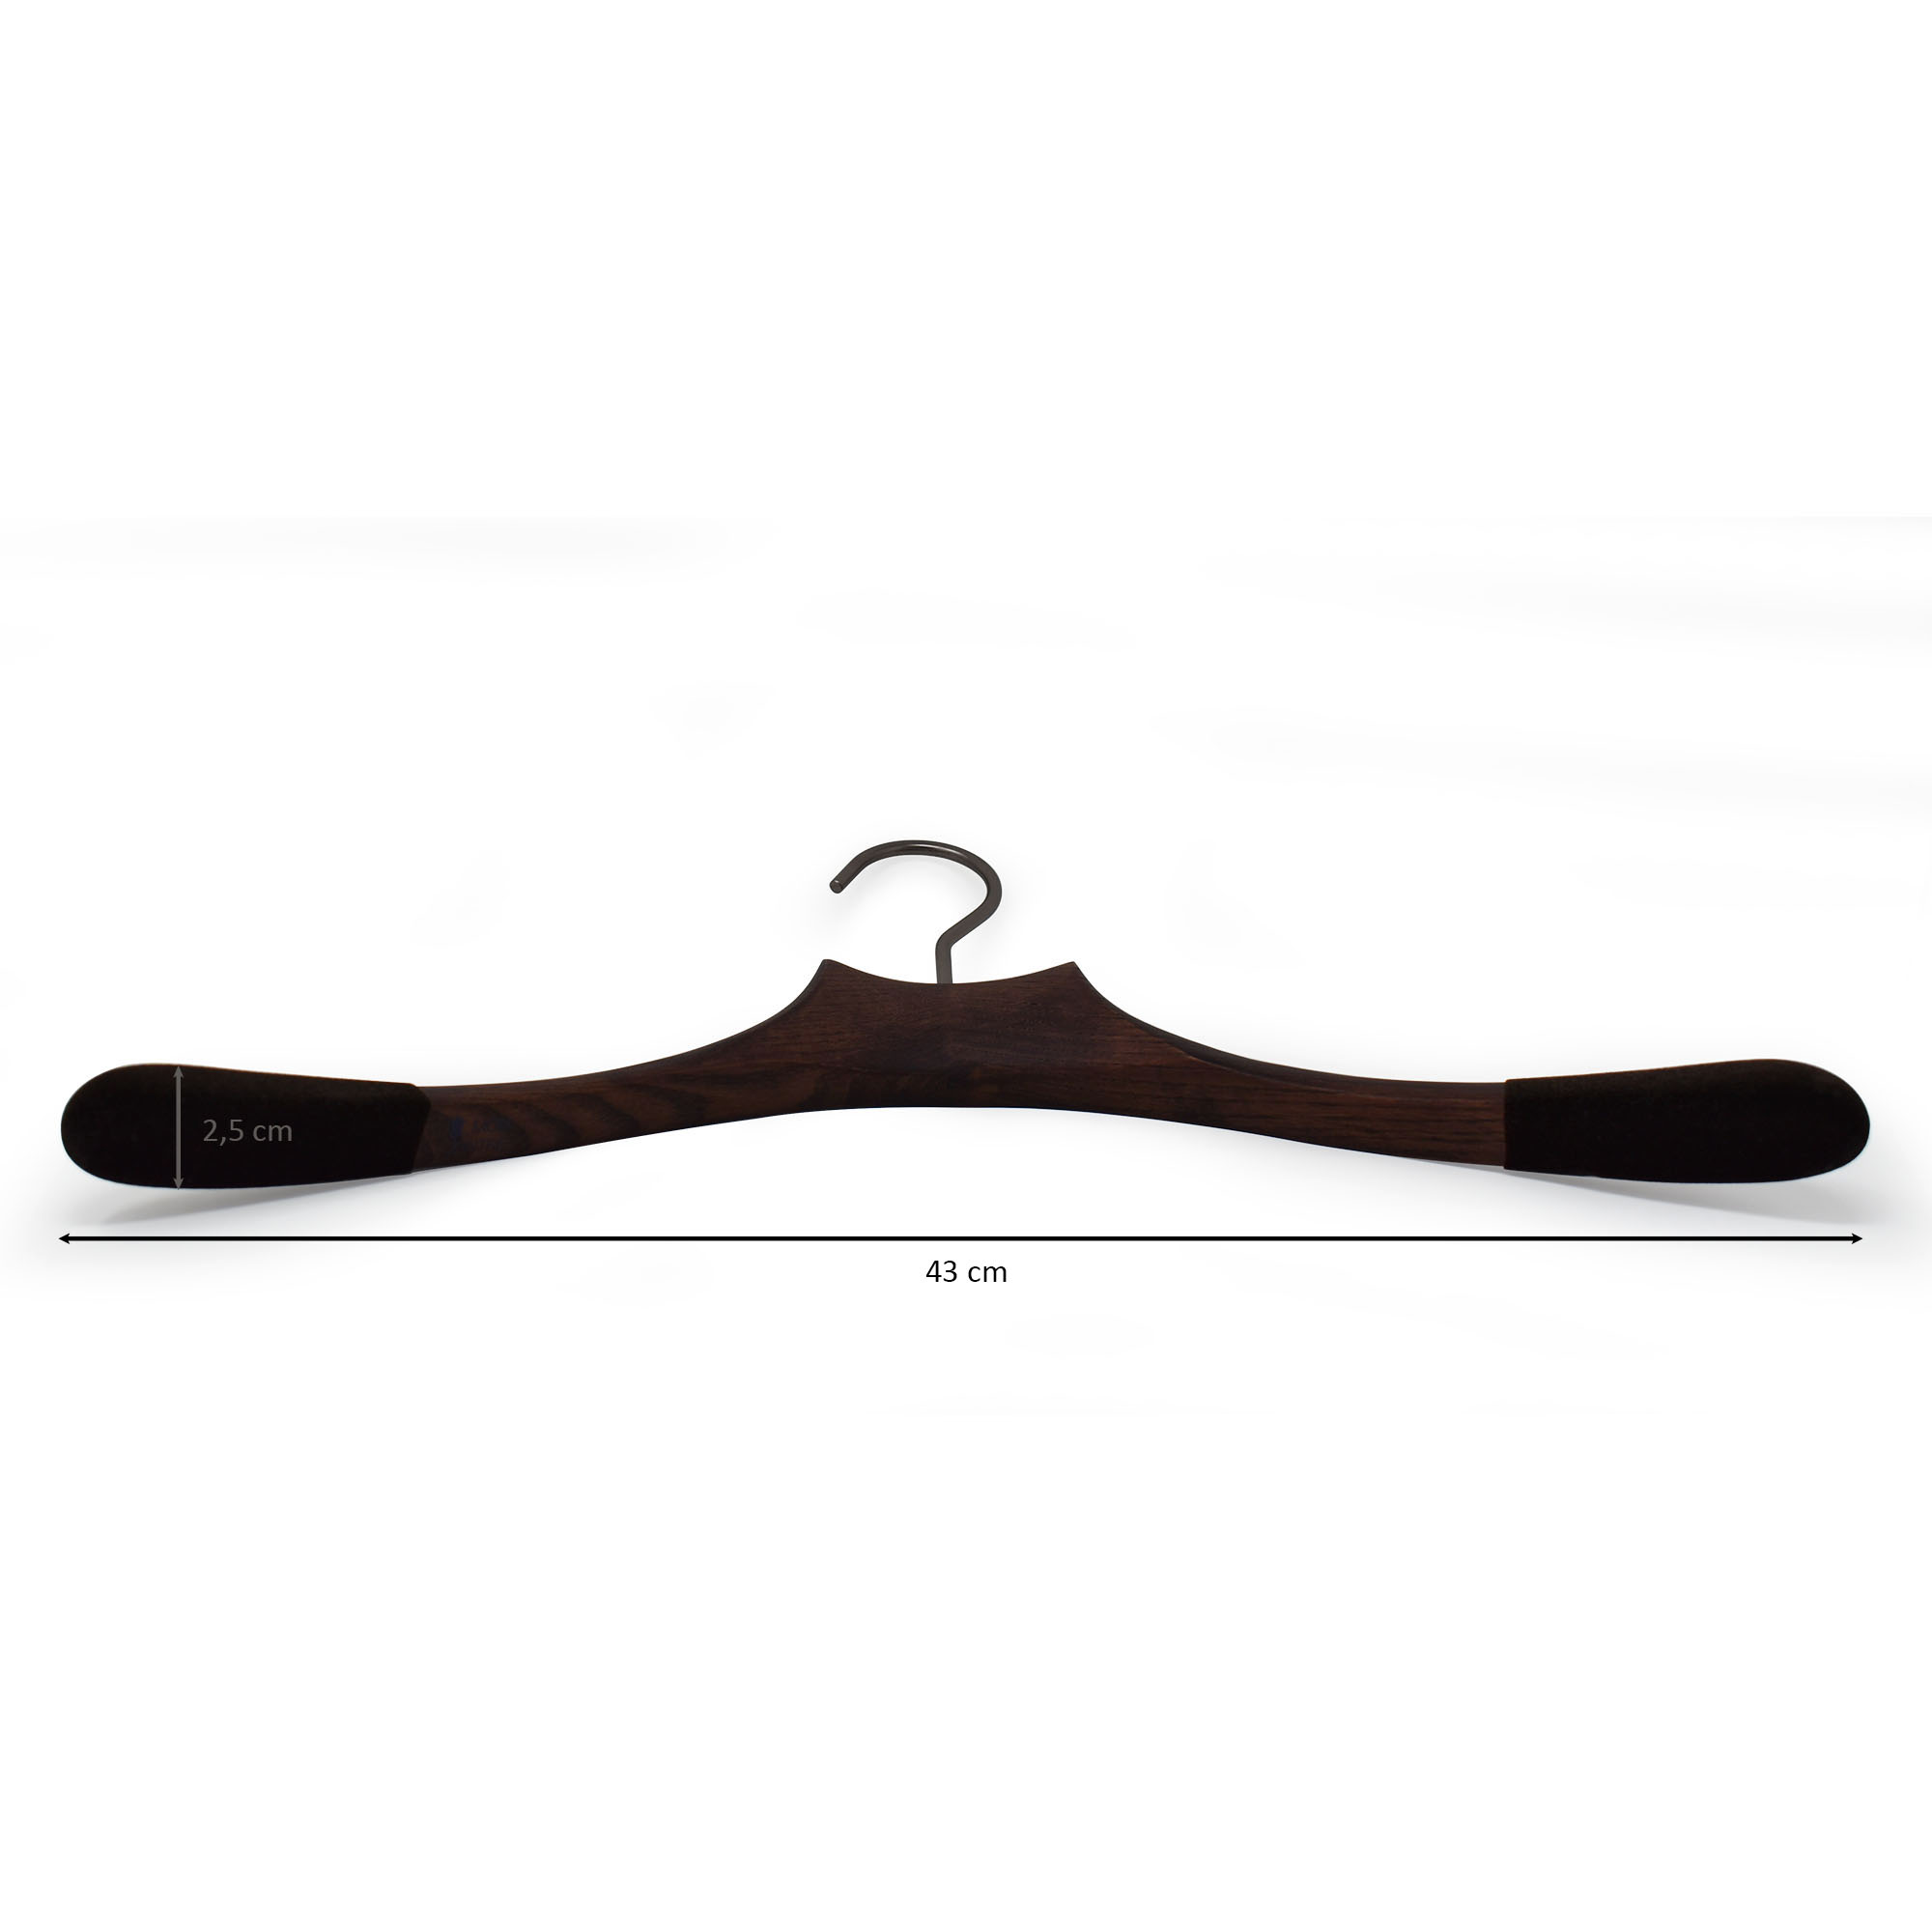 Luxury hangers for shirts with hollowed collar, these 10 hangers in ash wood and anti-slip velvet on the shoulders are made for your dressing room.